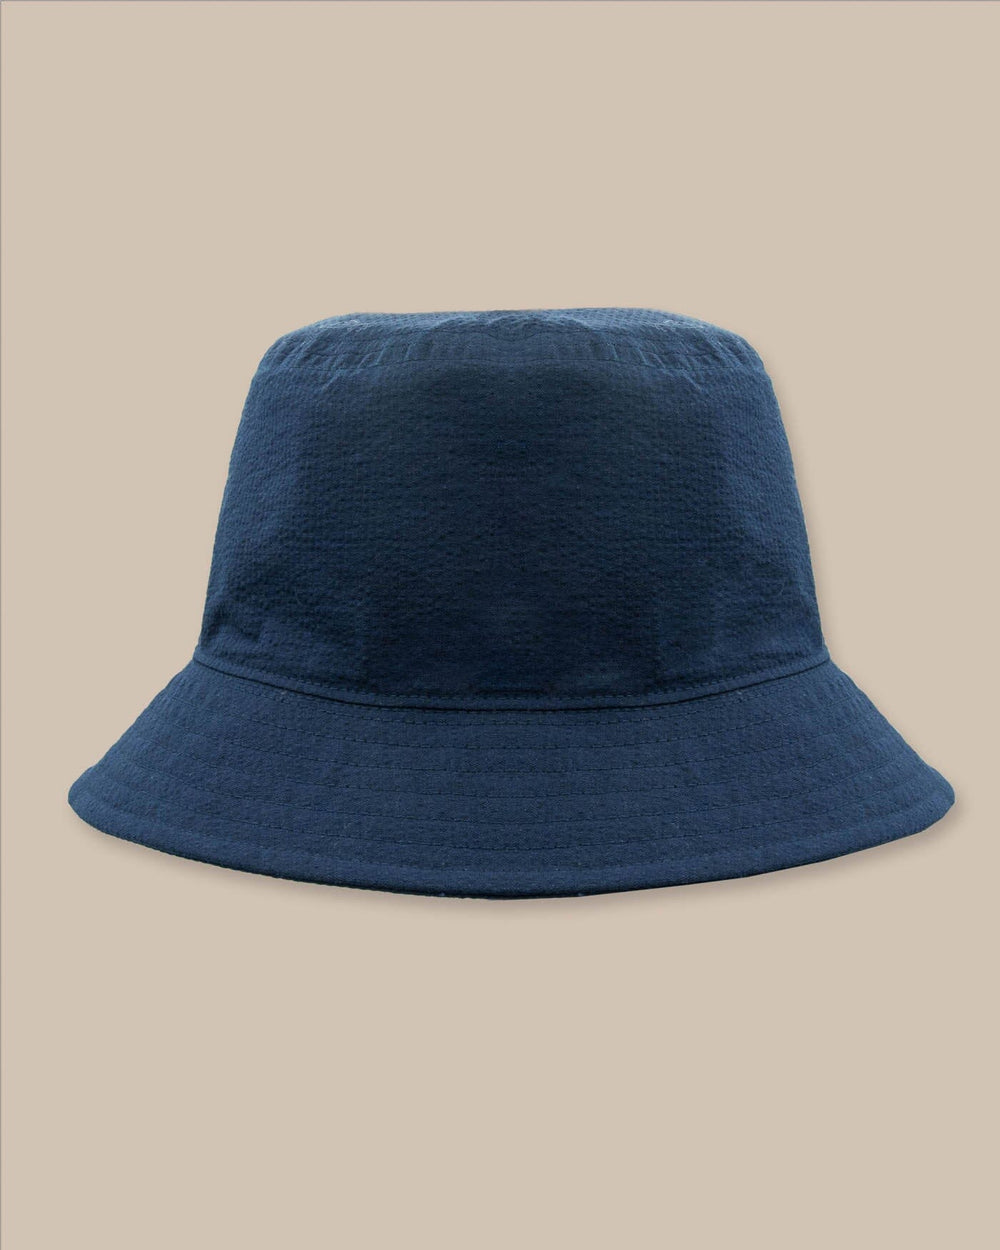 The back view of the Southern Tide Sun Washed Seersucker Bucket Hat by Southern Tide - Navy